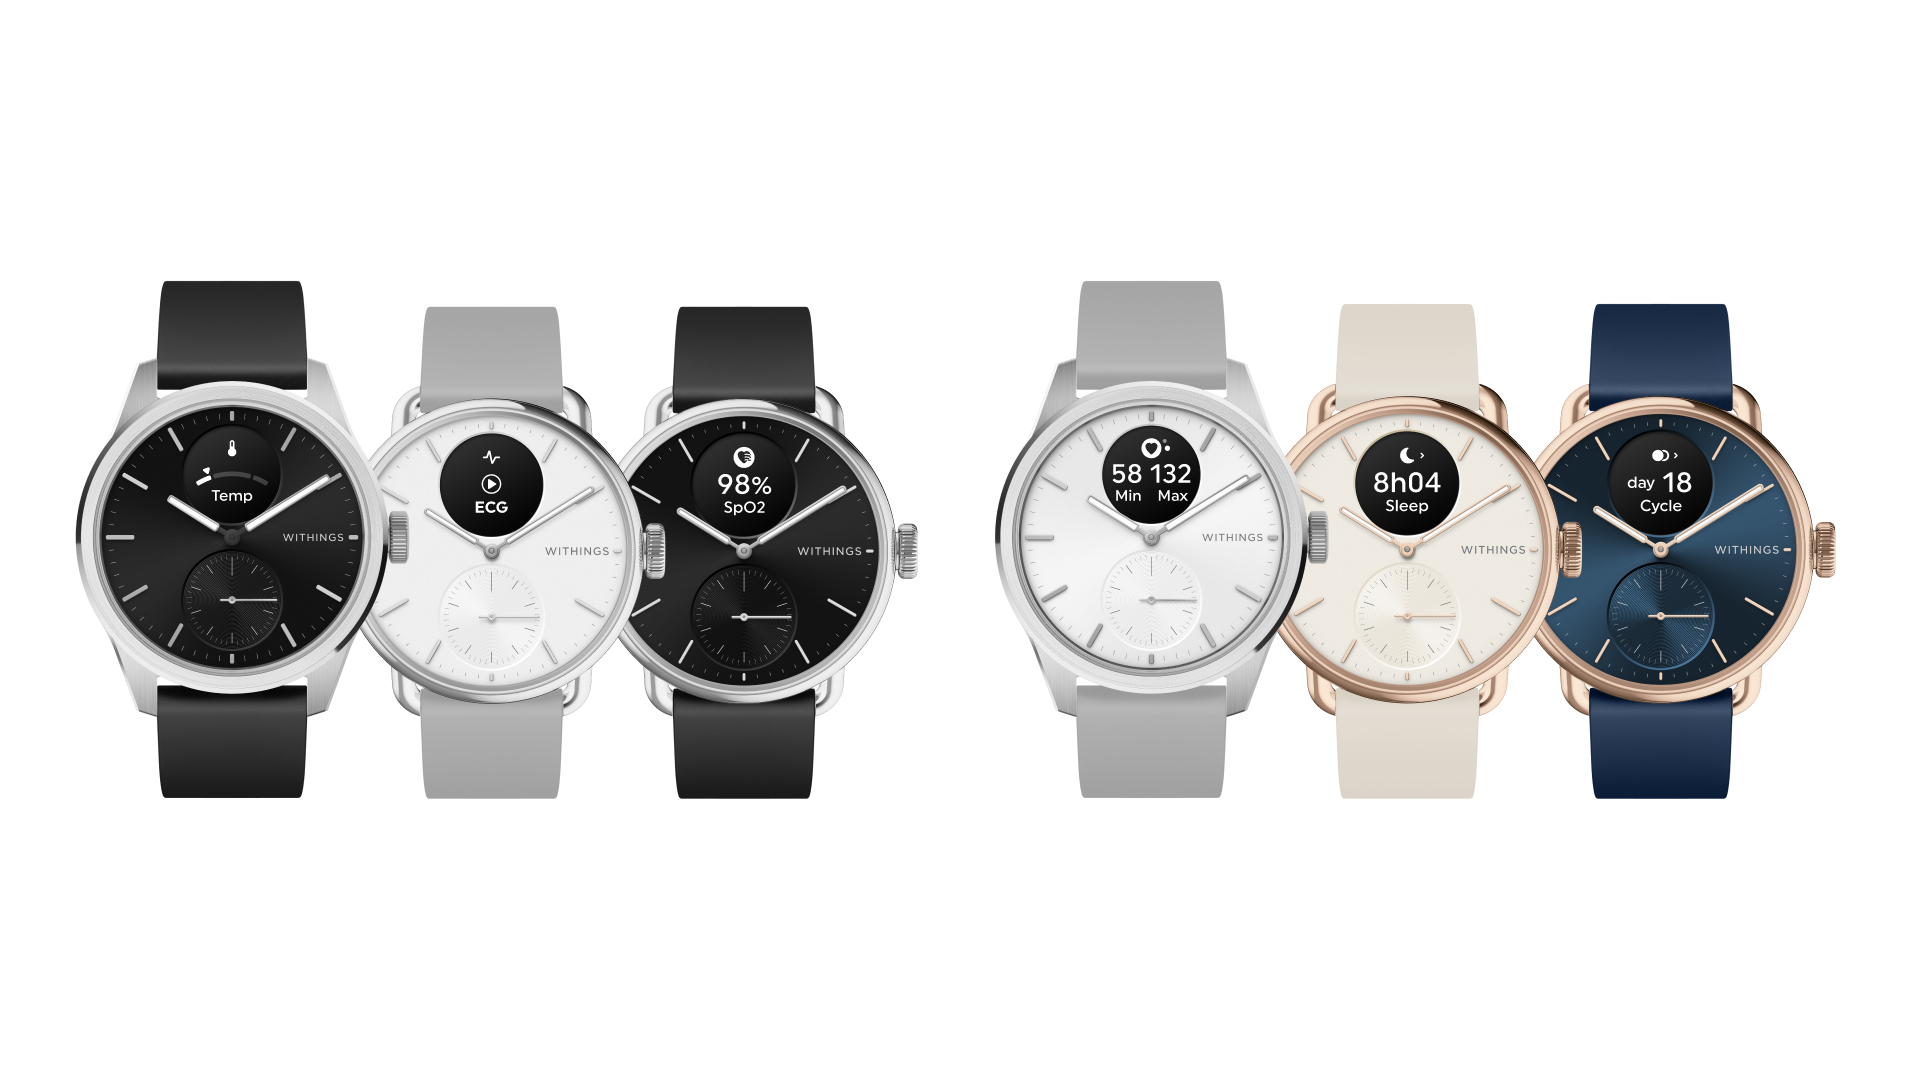 ScanWatch by Withings: the (almost) perfect hybrid smartwatch - Galaxus